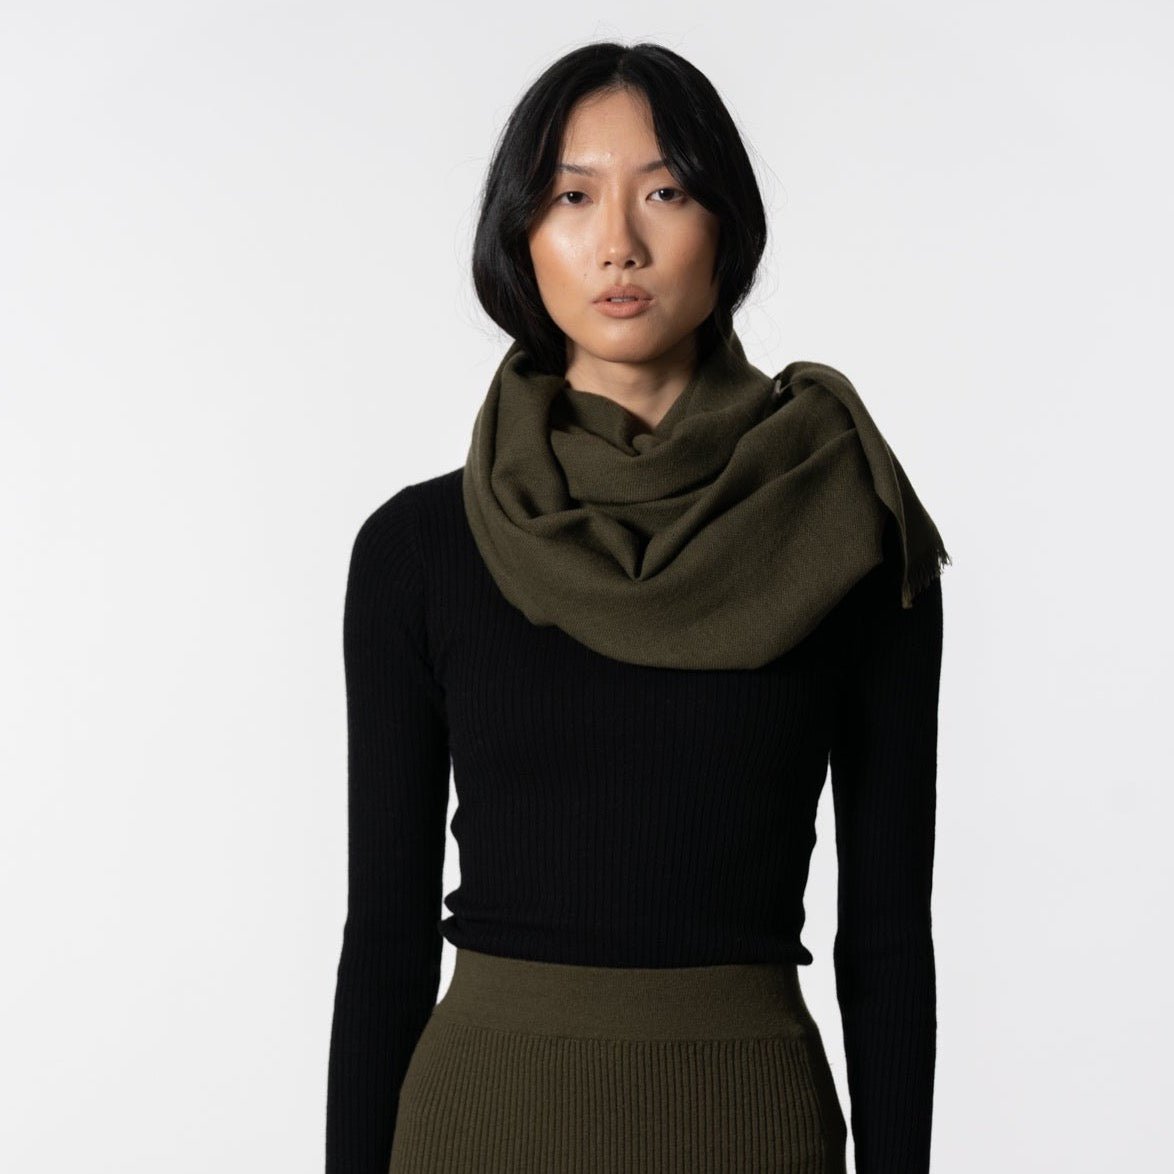 A model wears a dark green scarf made of 100% wool. The Merino woven Scarf in Olive Green is designed by Dinadi and handmade in Nepal.